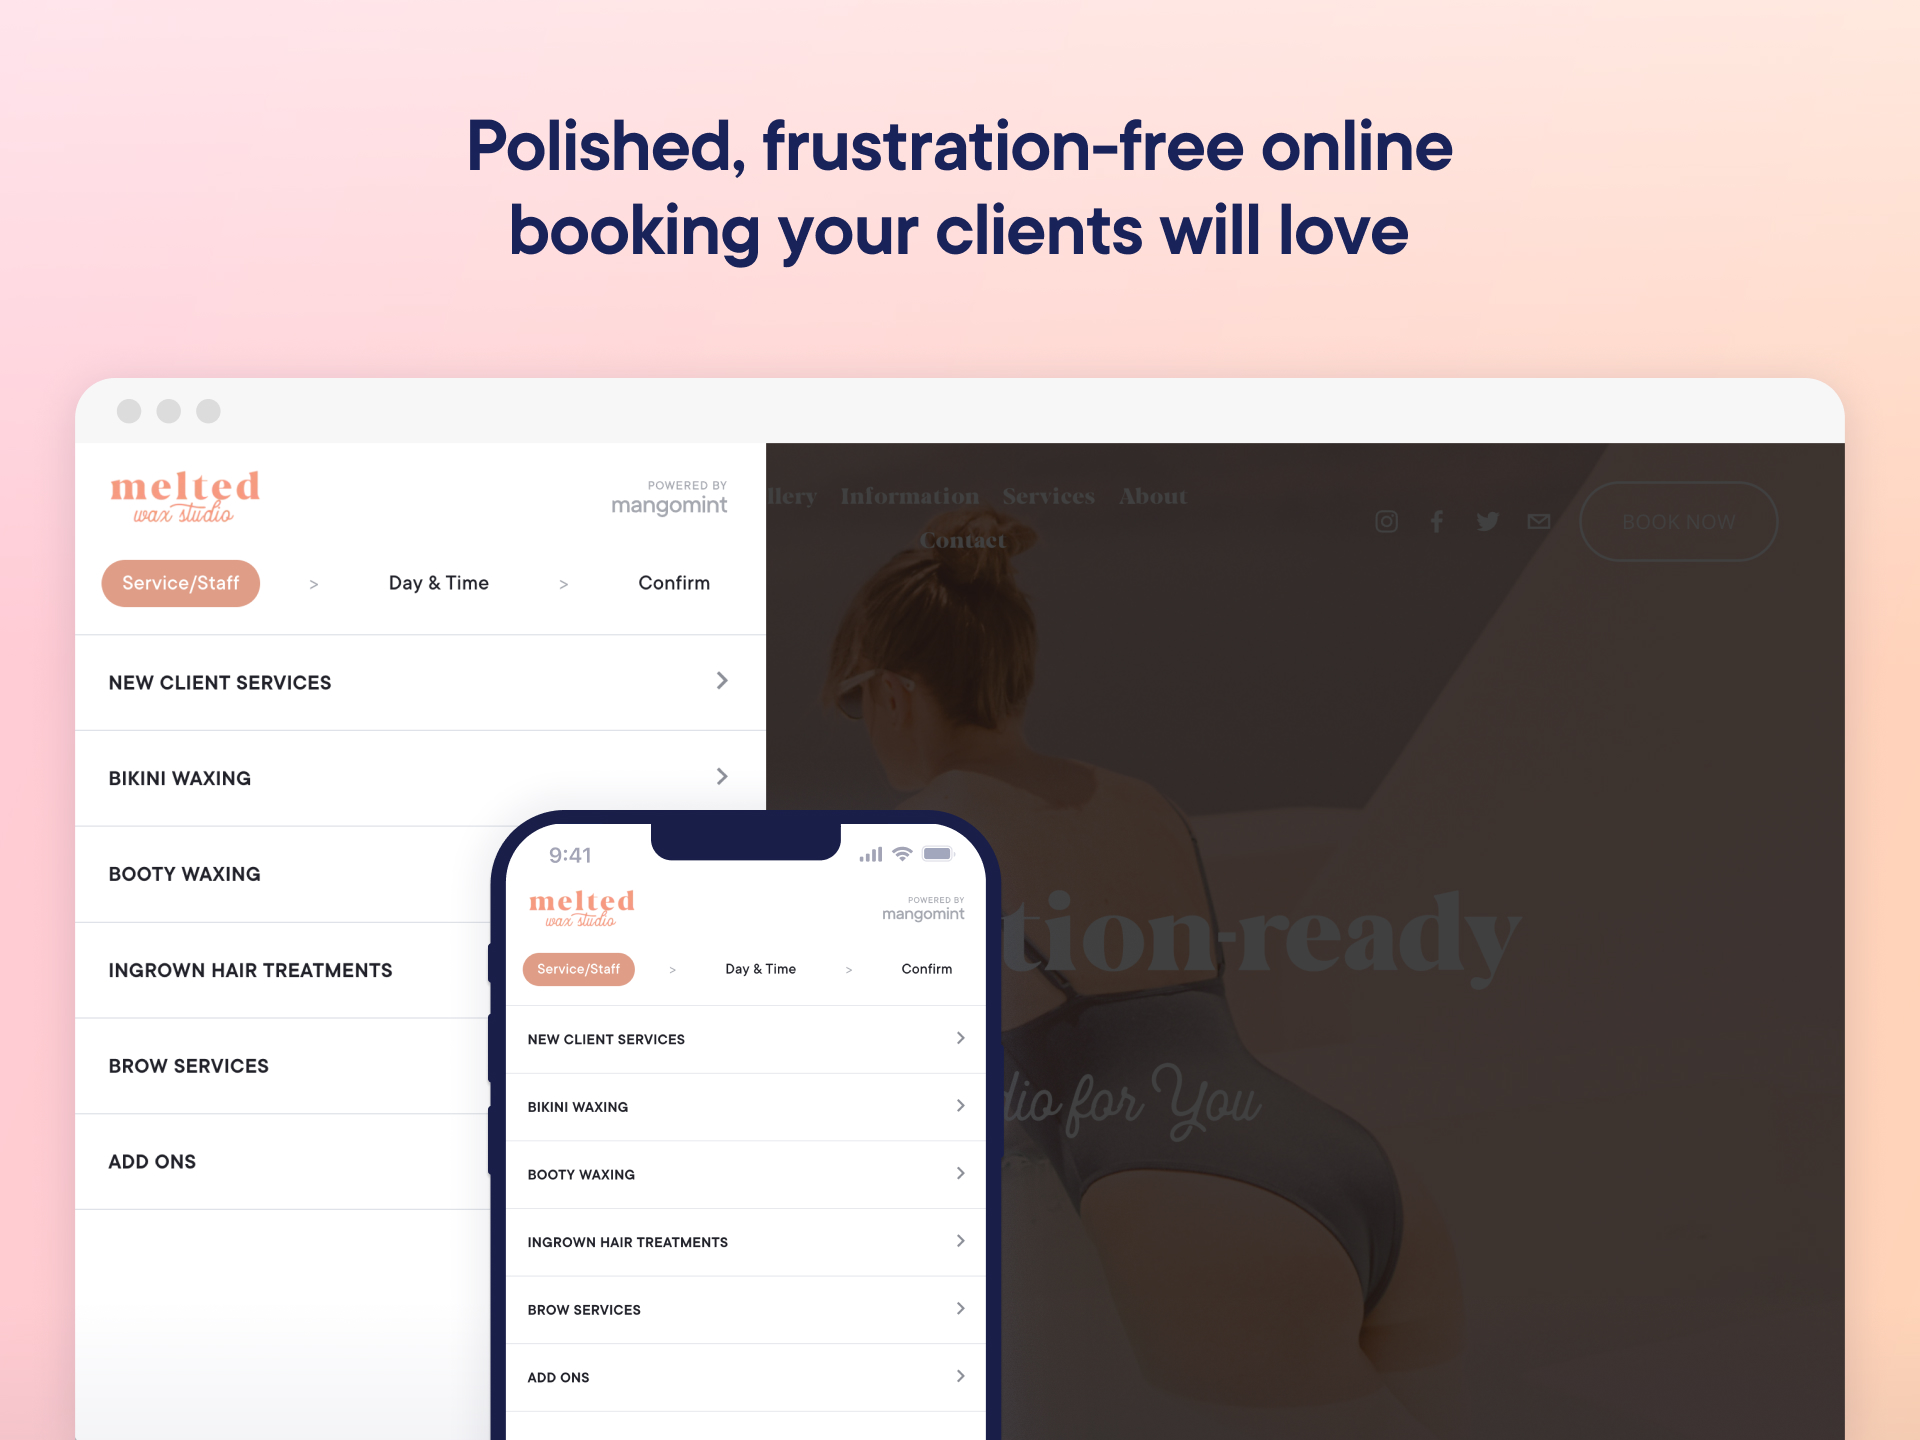 Polished, frustration-free online booking that your clients will love.